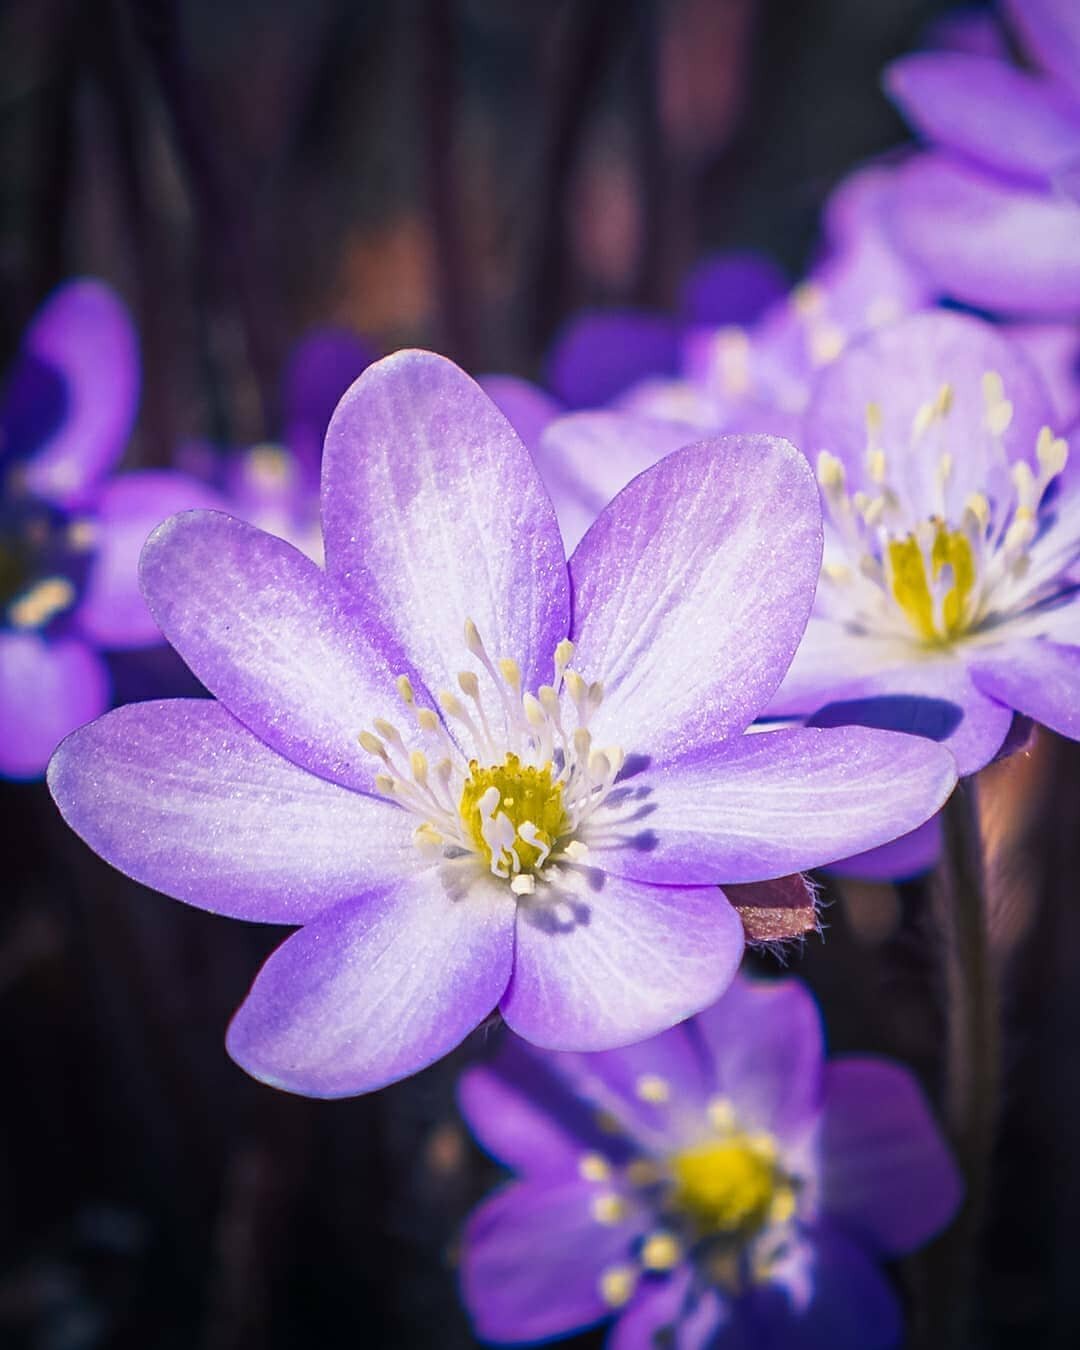 🌲🌱🌺💚 More signs of spring! It doesn't seem that we'll have another frost. Reaching 23C today and sunny for the second time this spring. Little flowers, like these hepaticas, are popping up everywhere in the woods! 🌱🌺🌲💚 Swipe ⬅️ for 2 images. 